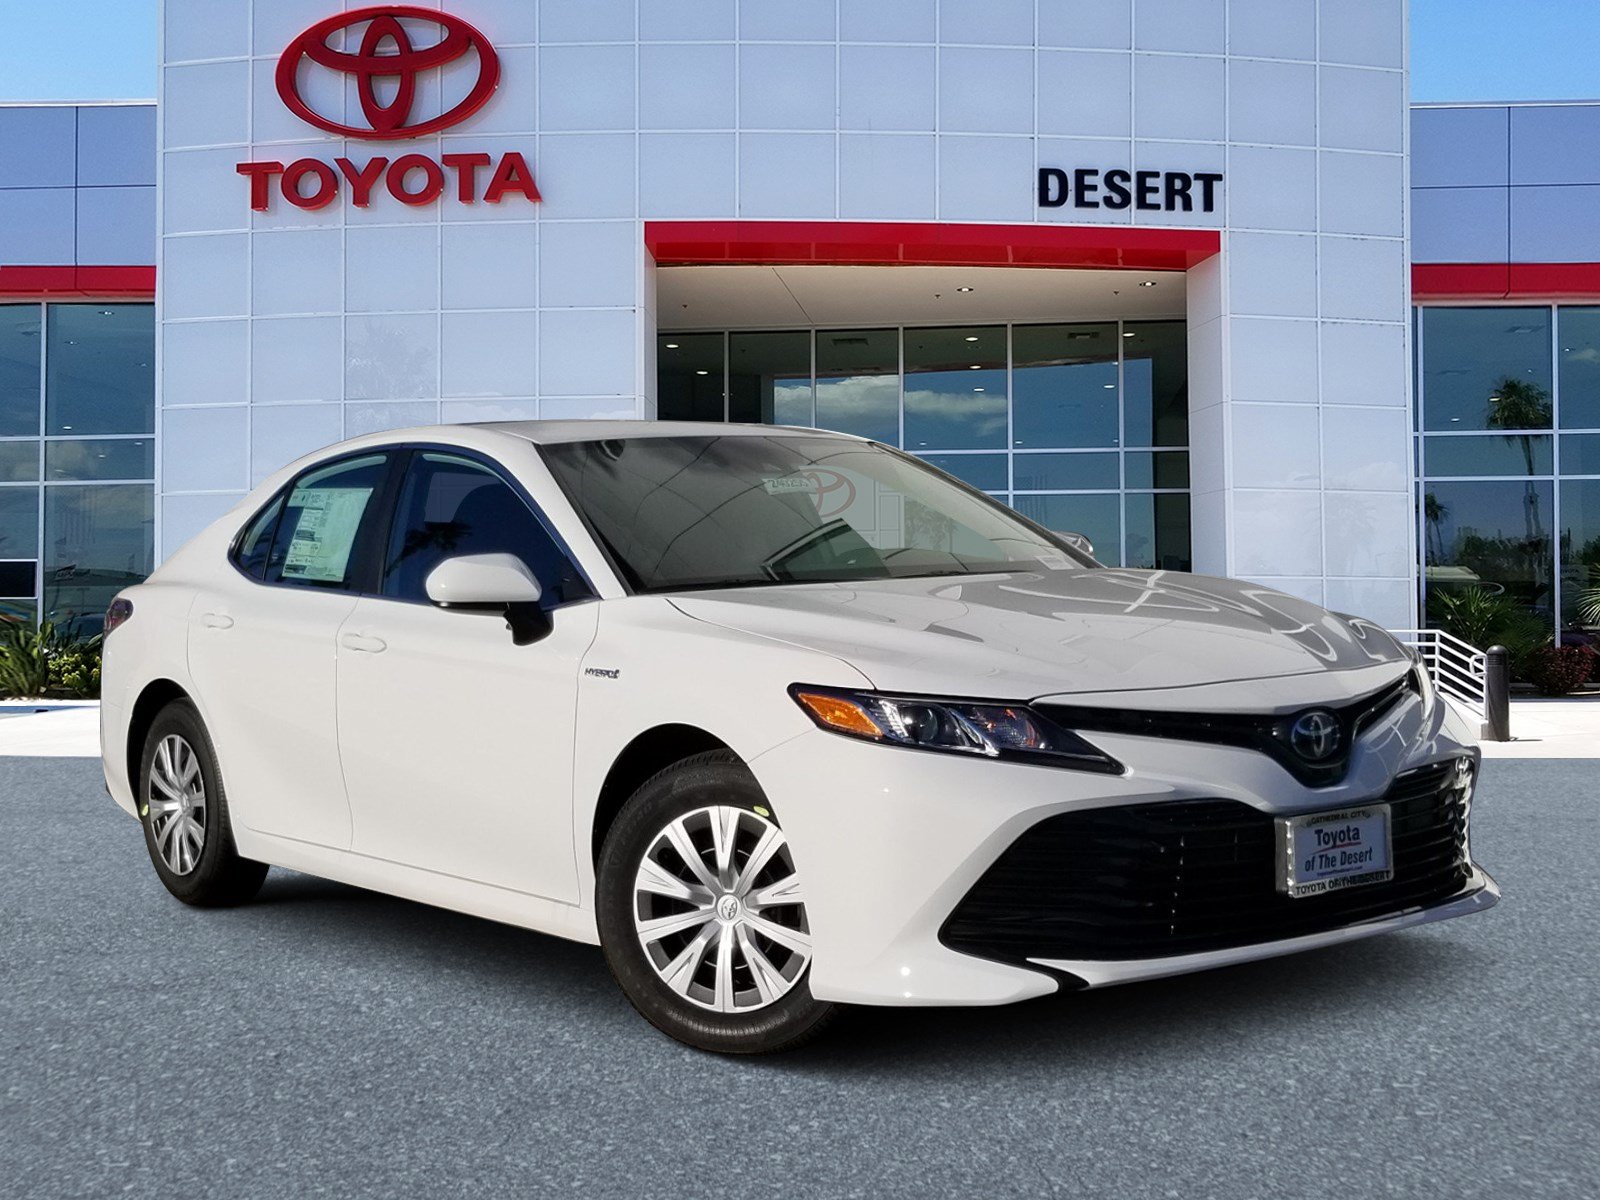 New 2020 Toyota Camry Hybrid LE 4dr Car in Cathedral City #240255 ...
